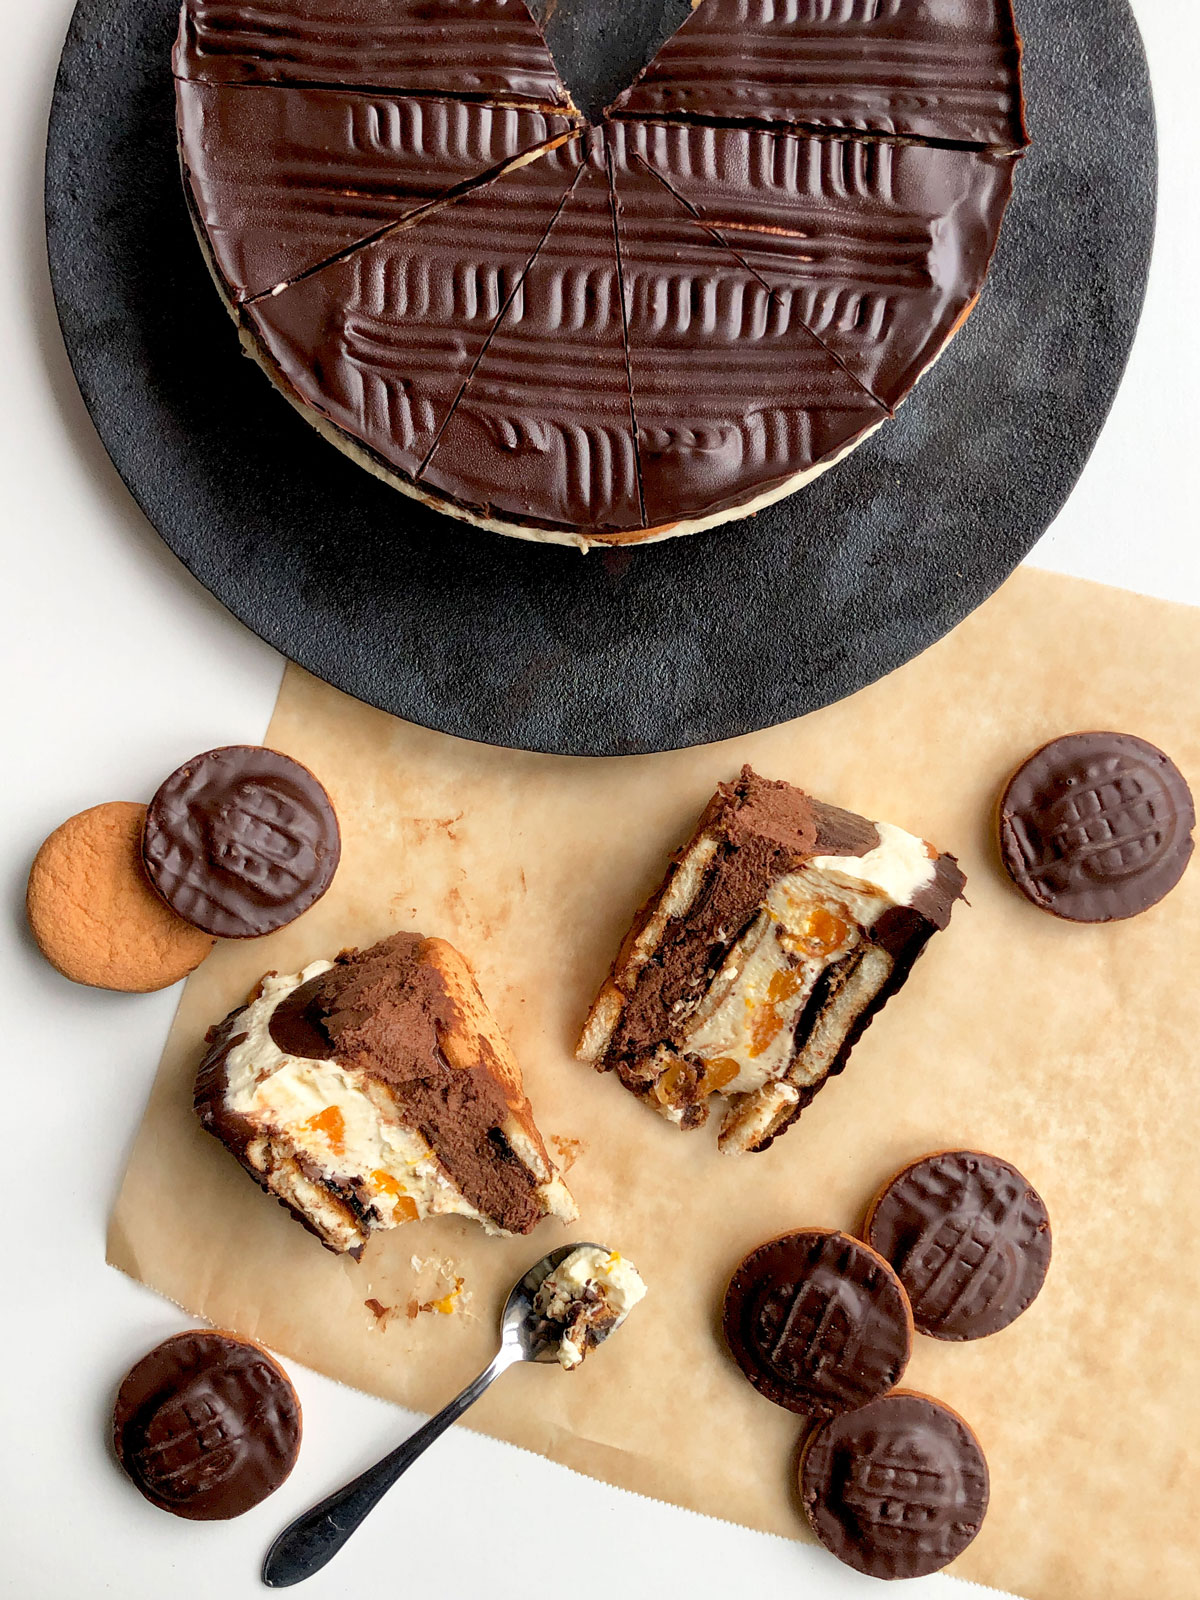 Bird-eye view: two slices of a whipped cream cheesecake, round chocolate covered cake with a few Jaffa cakes scattered around. A round Jaffa cake cheesecake on a cast iron